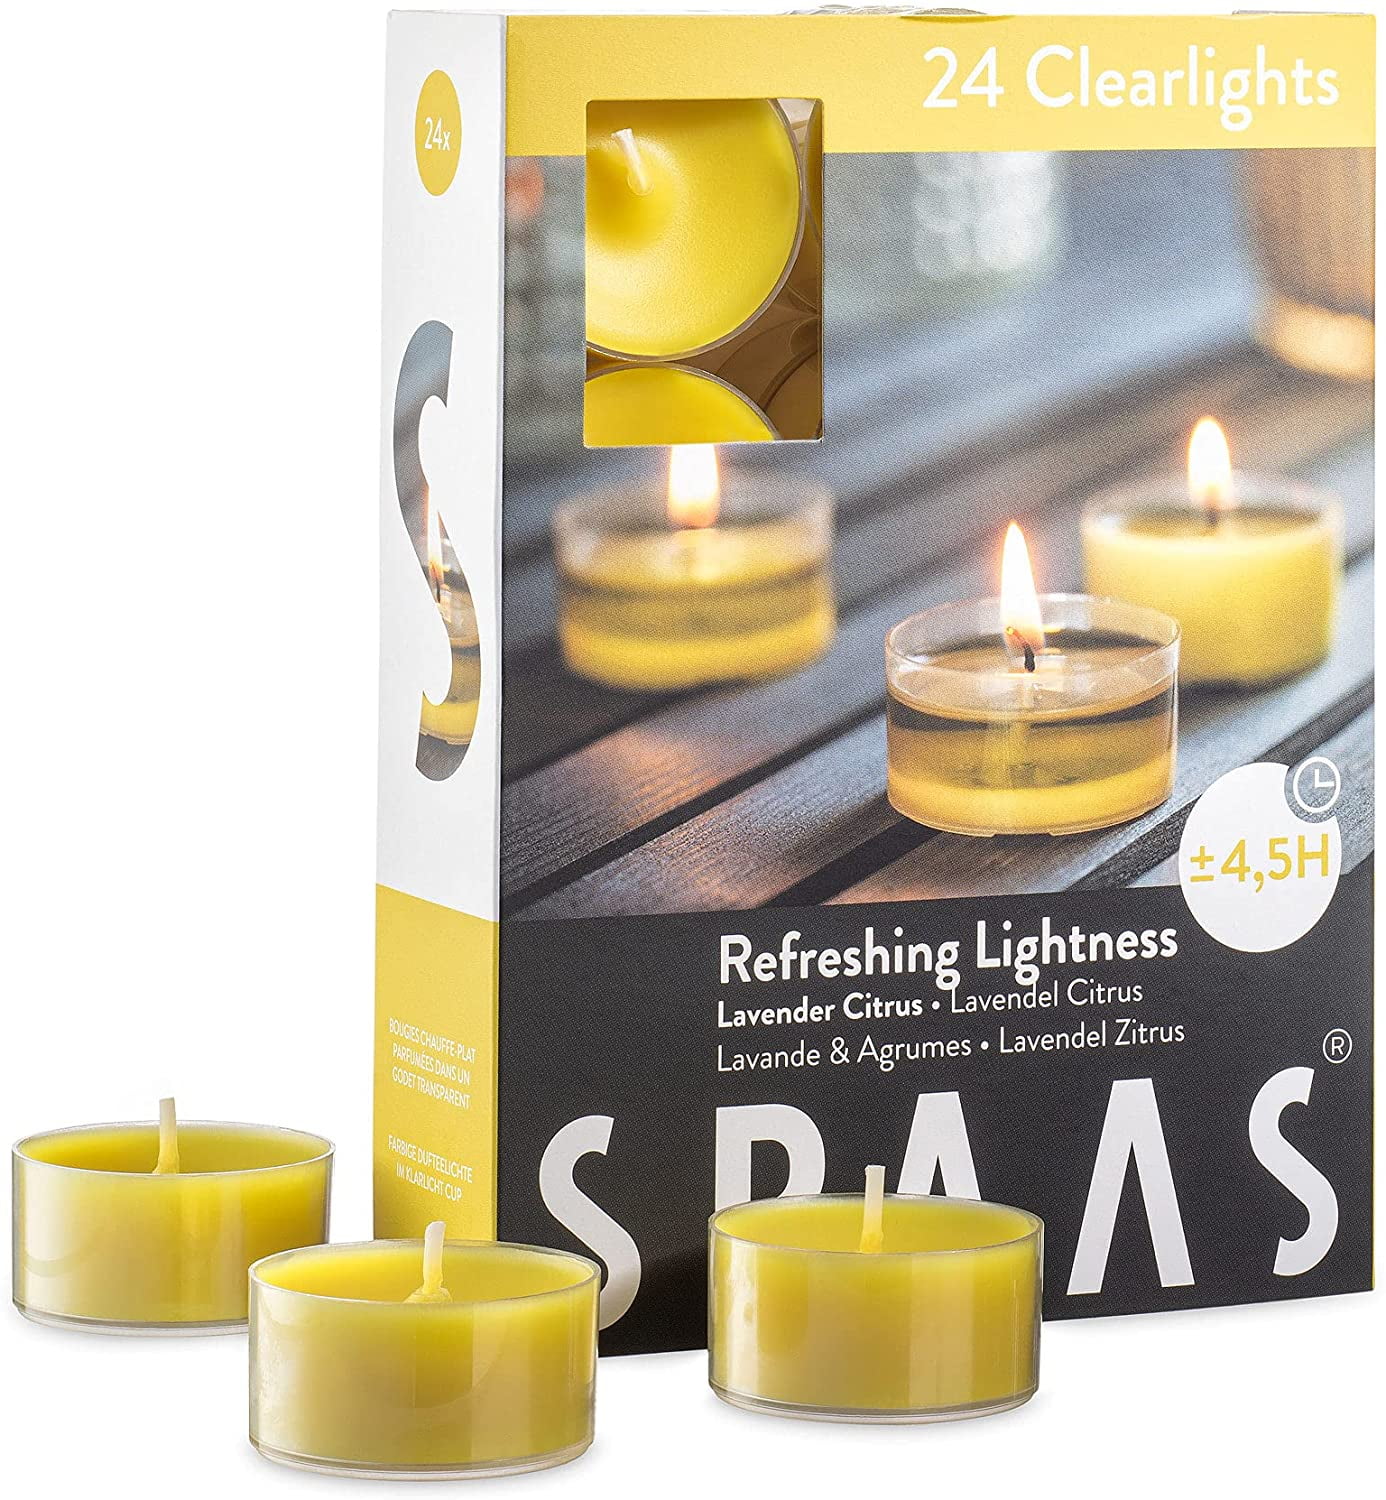 VARIOUS SCENTS,2.5 HOUR BURN TIME FRAGRANCED/SCENTED TEALIGHT CANDLES 